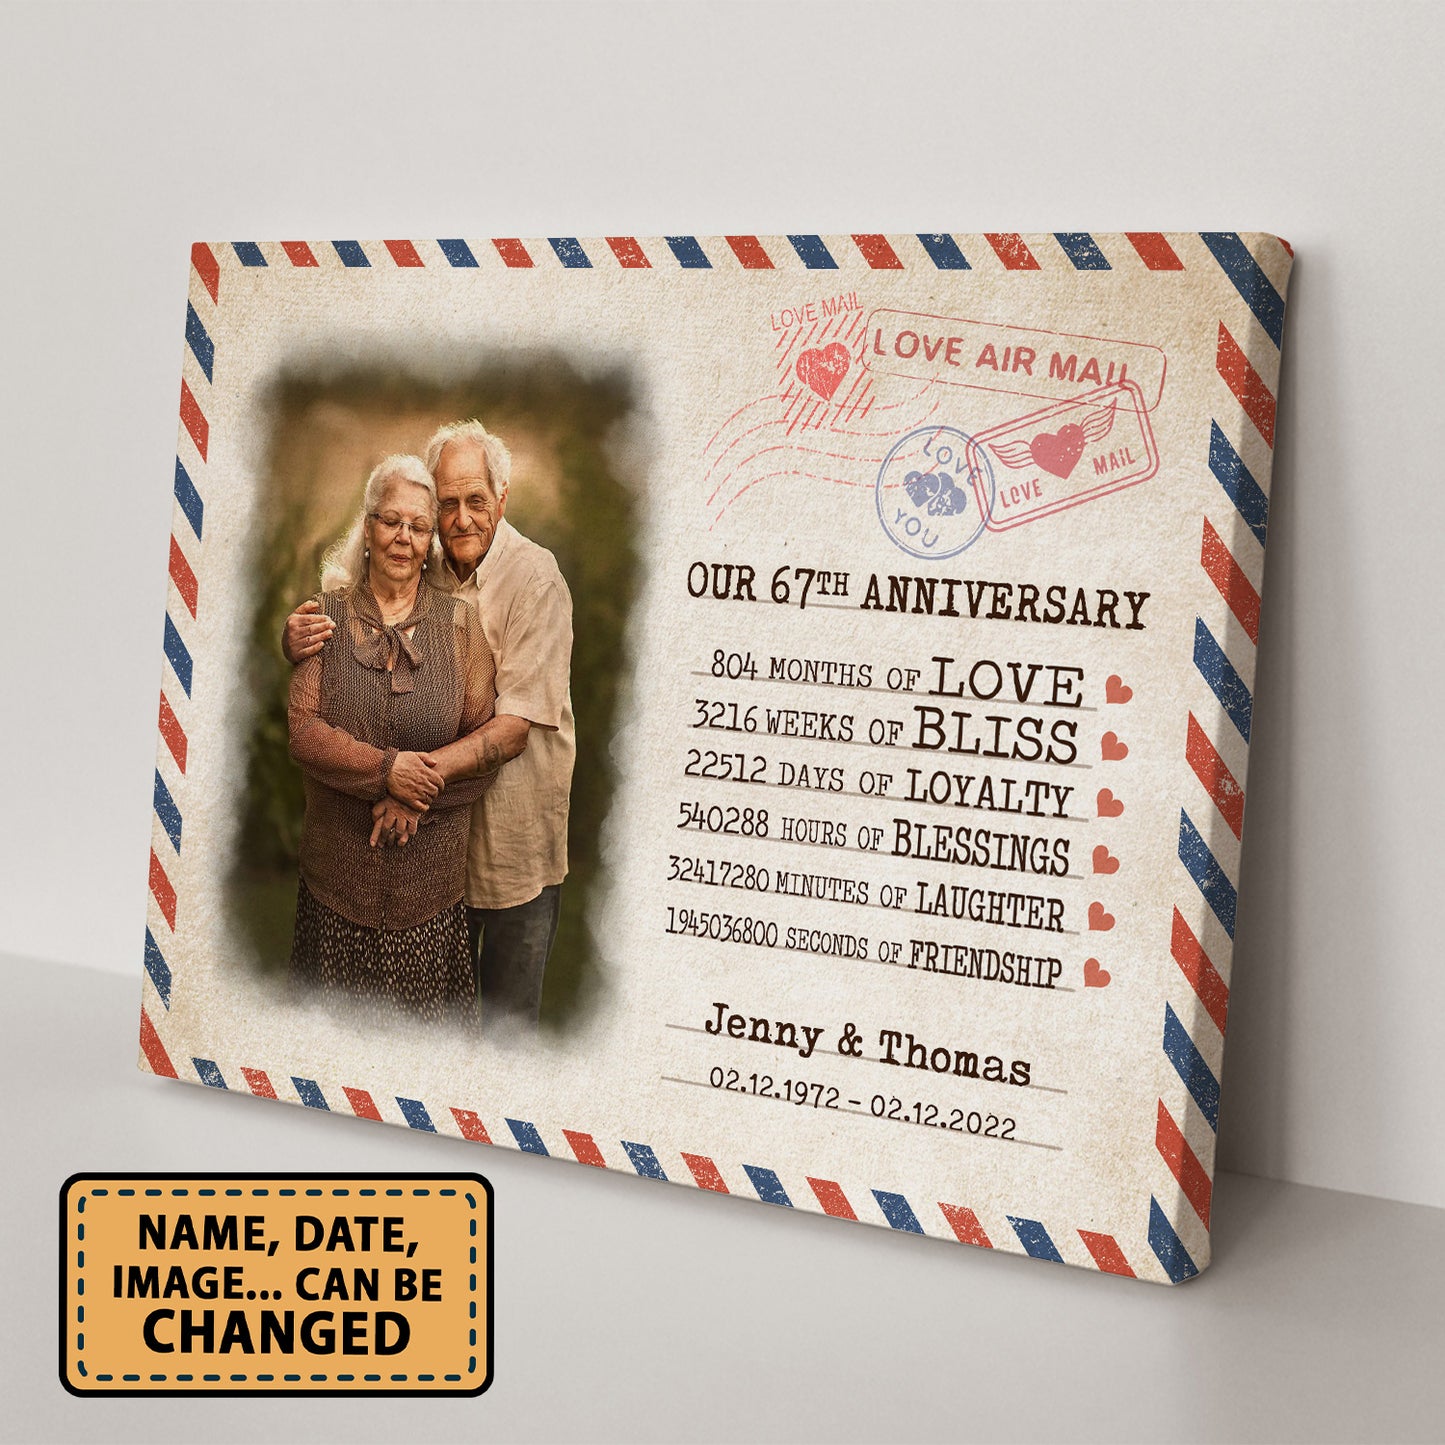 Our 67th Anniversary Letter Valentine Gift Personalized Canvas